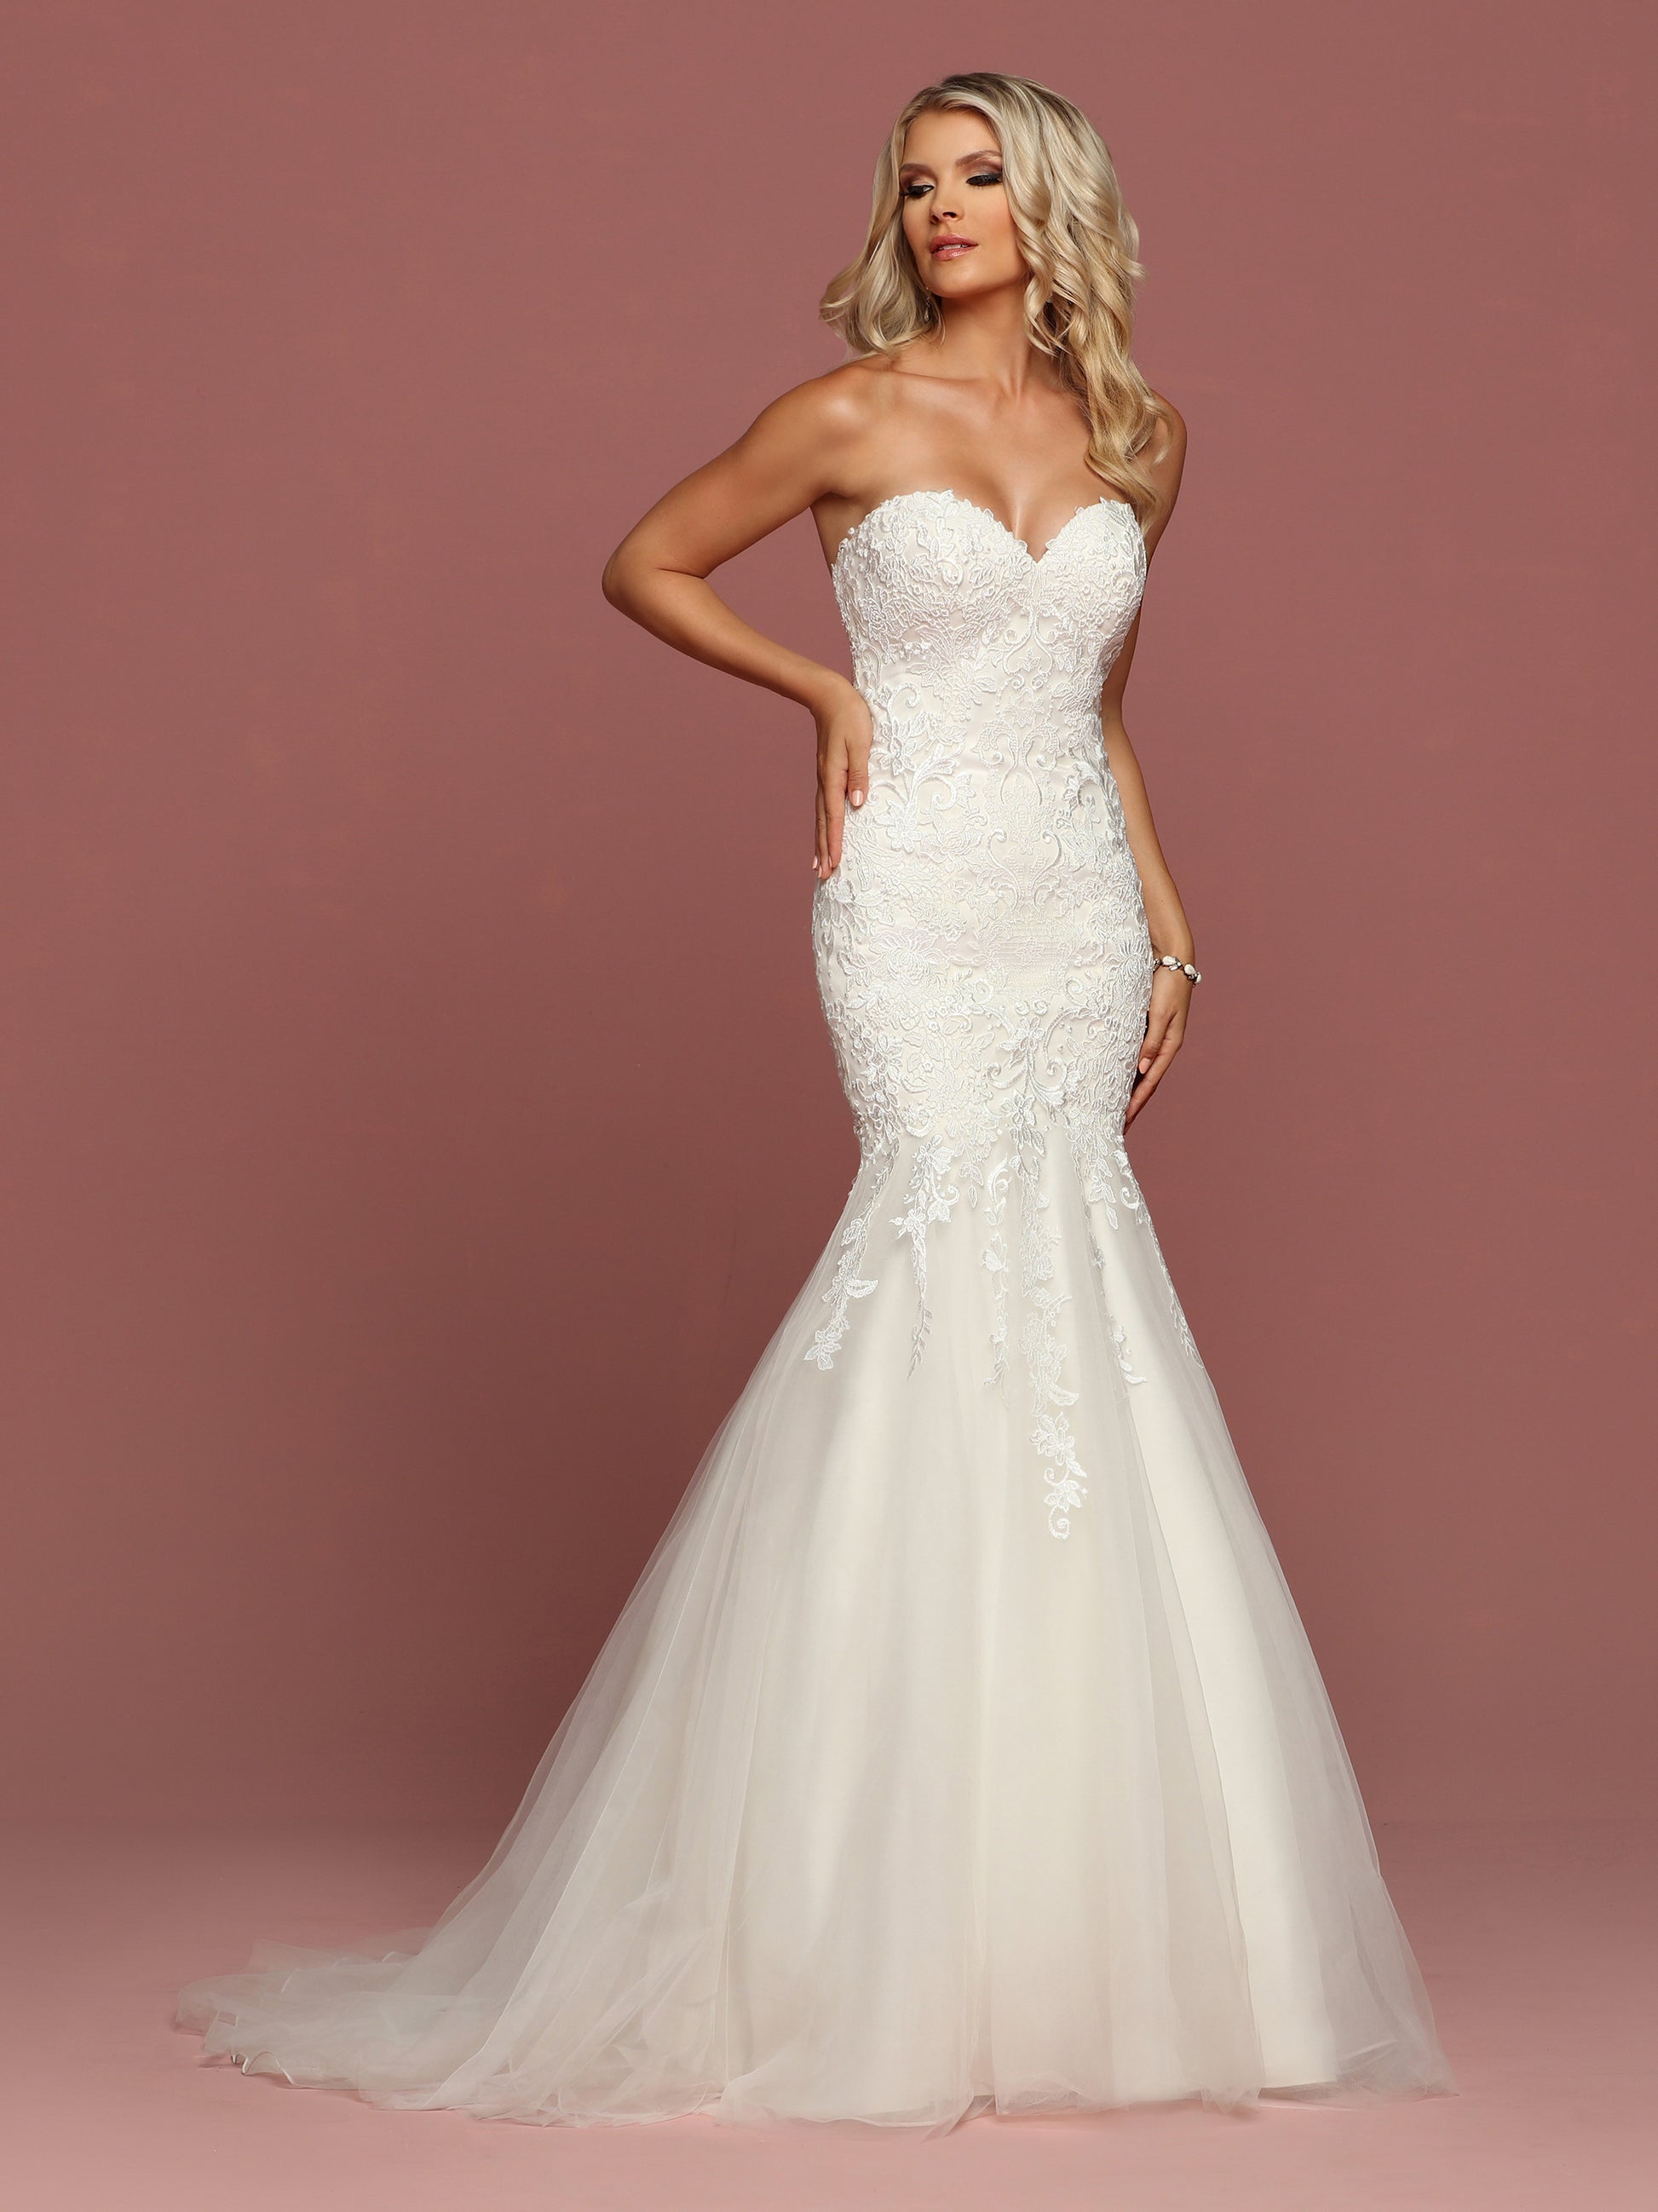 Davinci Bridal 50502  is a long Fit & Flare Mermaid Wedding Dress. Featuring a strapless sweetheart neckline with a bodice covered in delicate lace cascading down into the trumpet tulle skirt with a train in the back.  Available for 1-2 Week Delivery!!!  Available Sizes: 2,4,6,8,10,12,14,16,18,20  Available Colors: Ivory